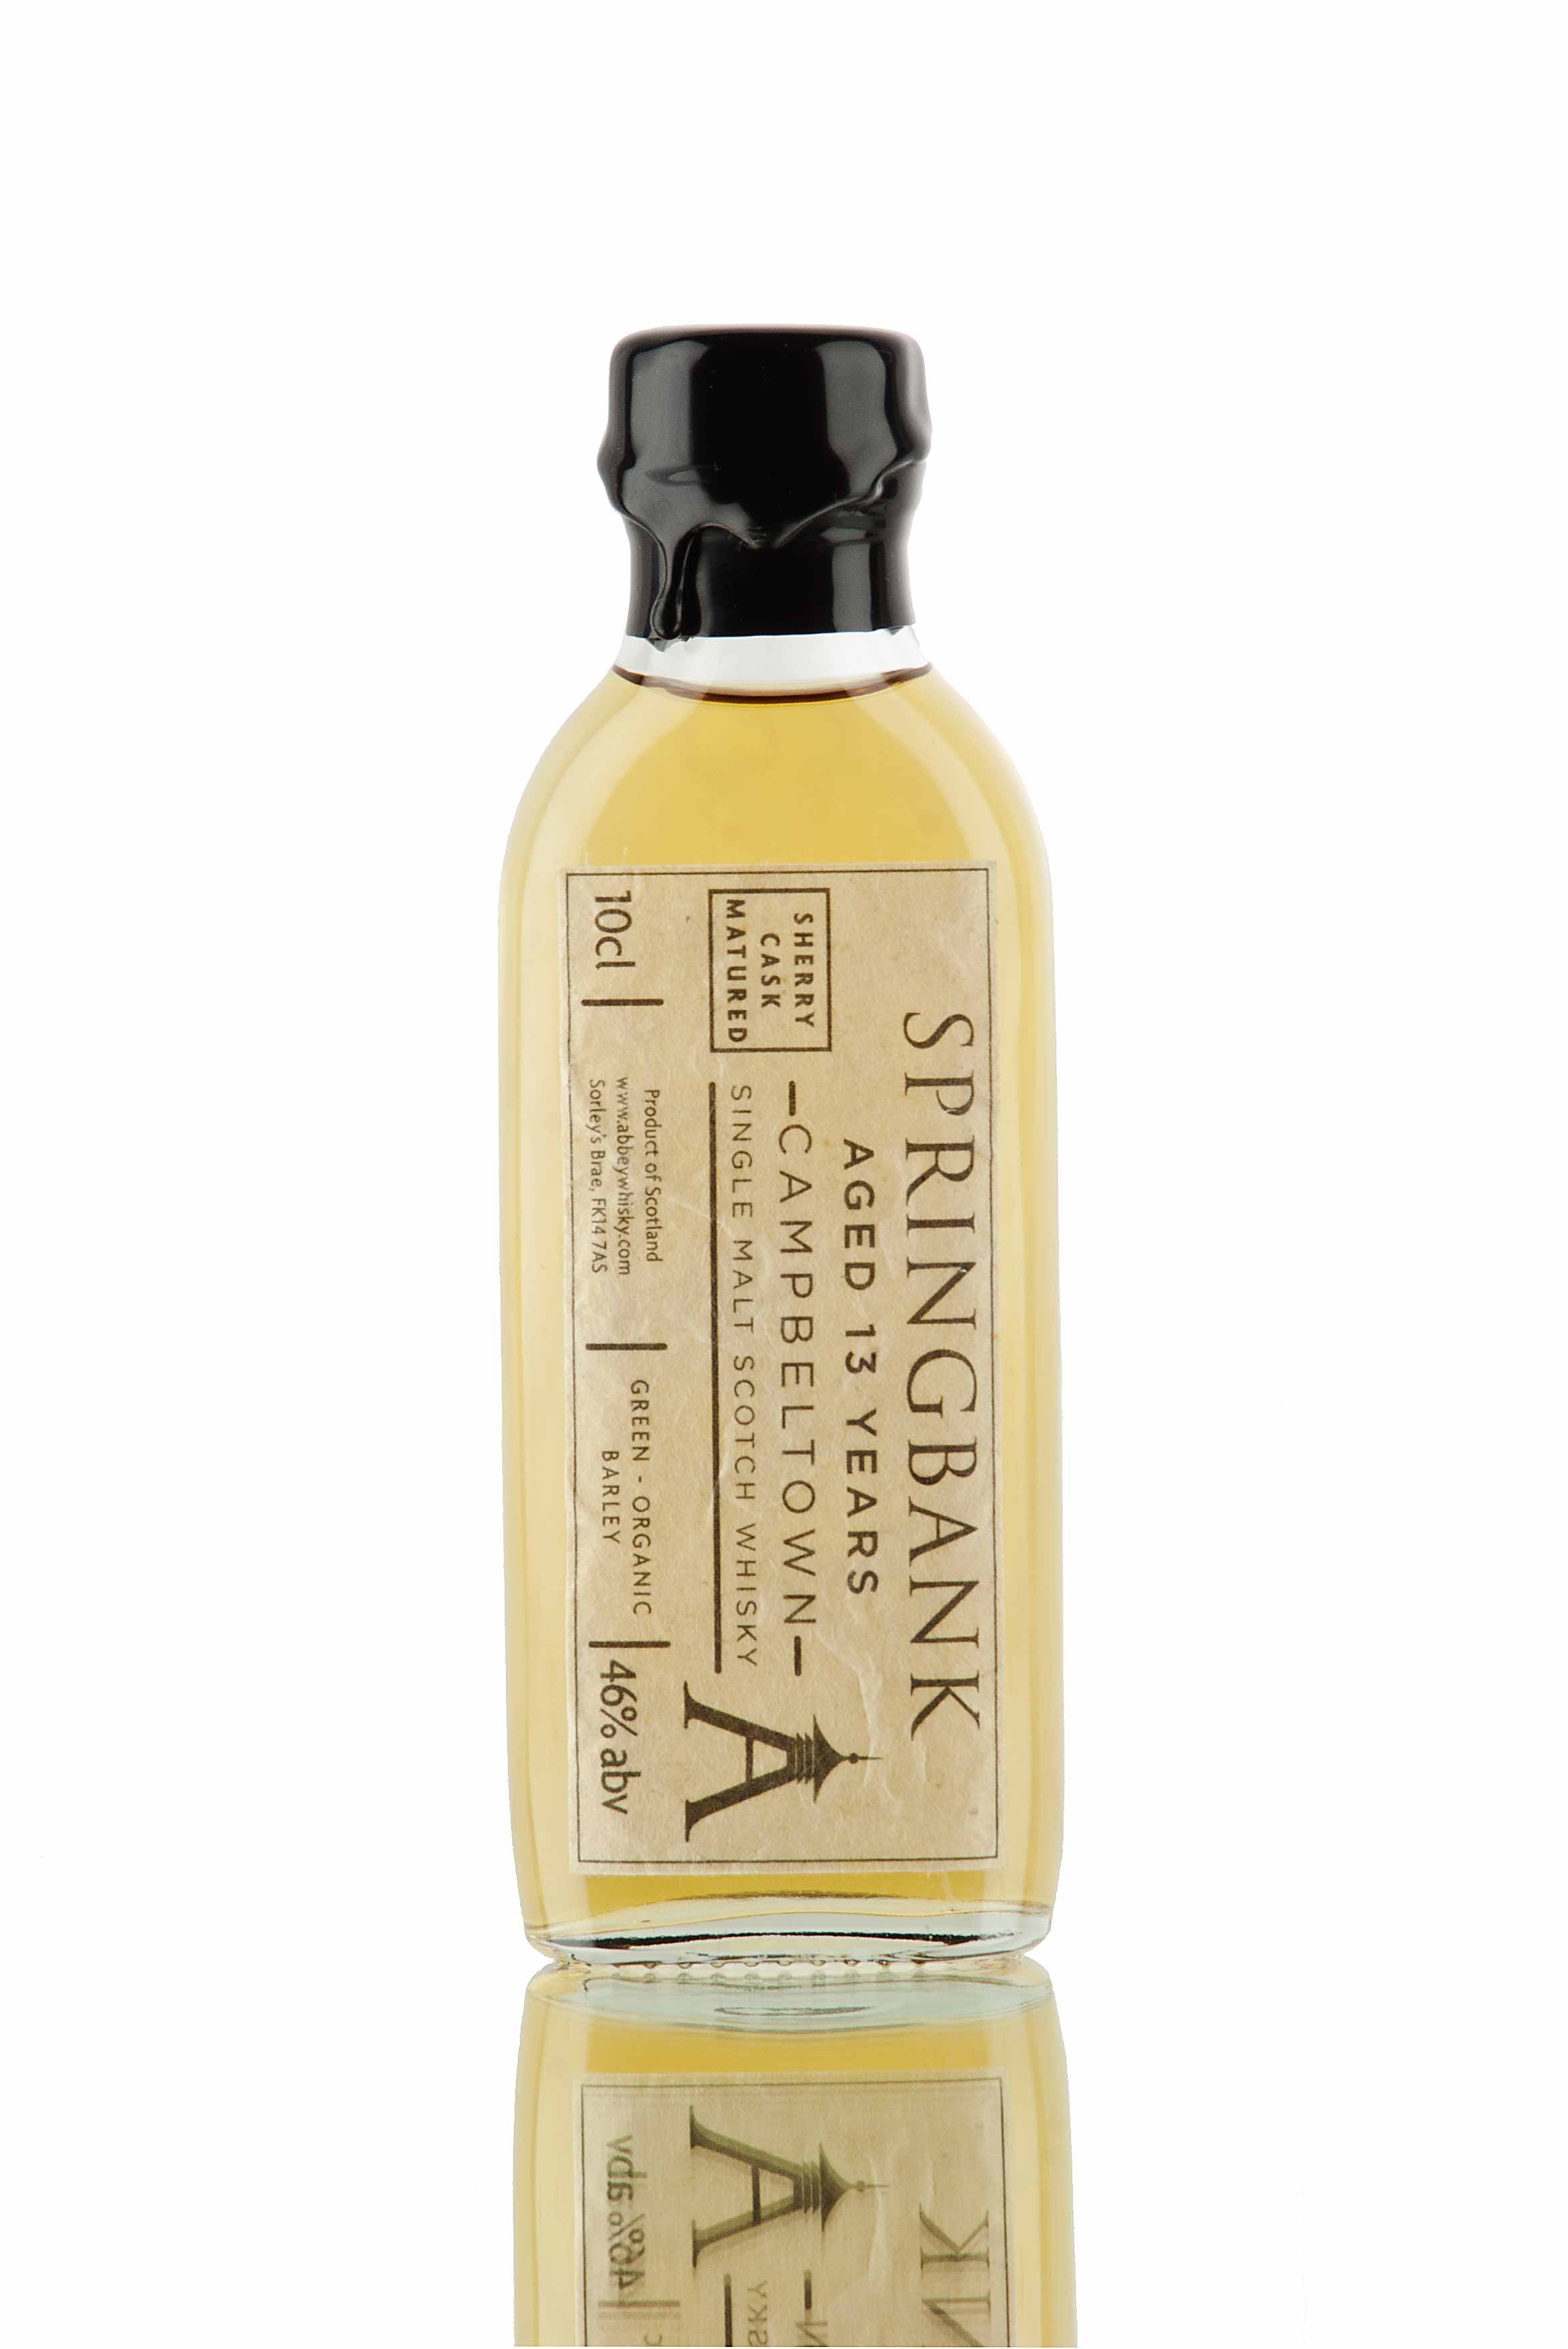 Springbank Green 13 Year Old Sherry Cask / 10cl Sample